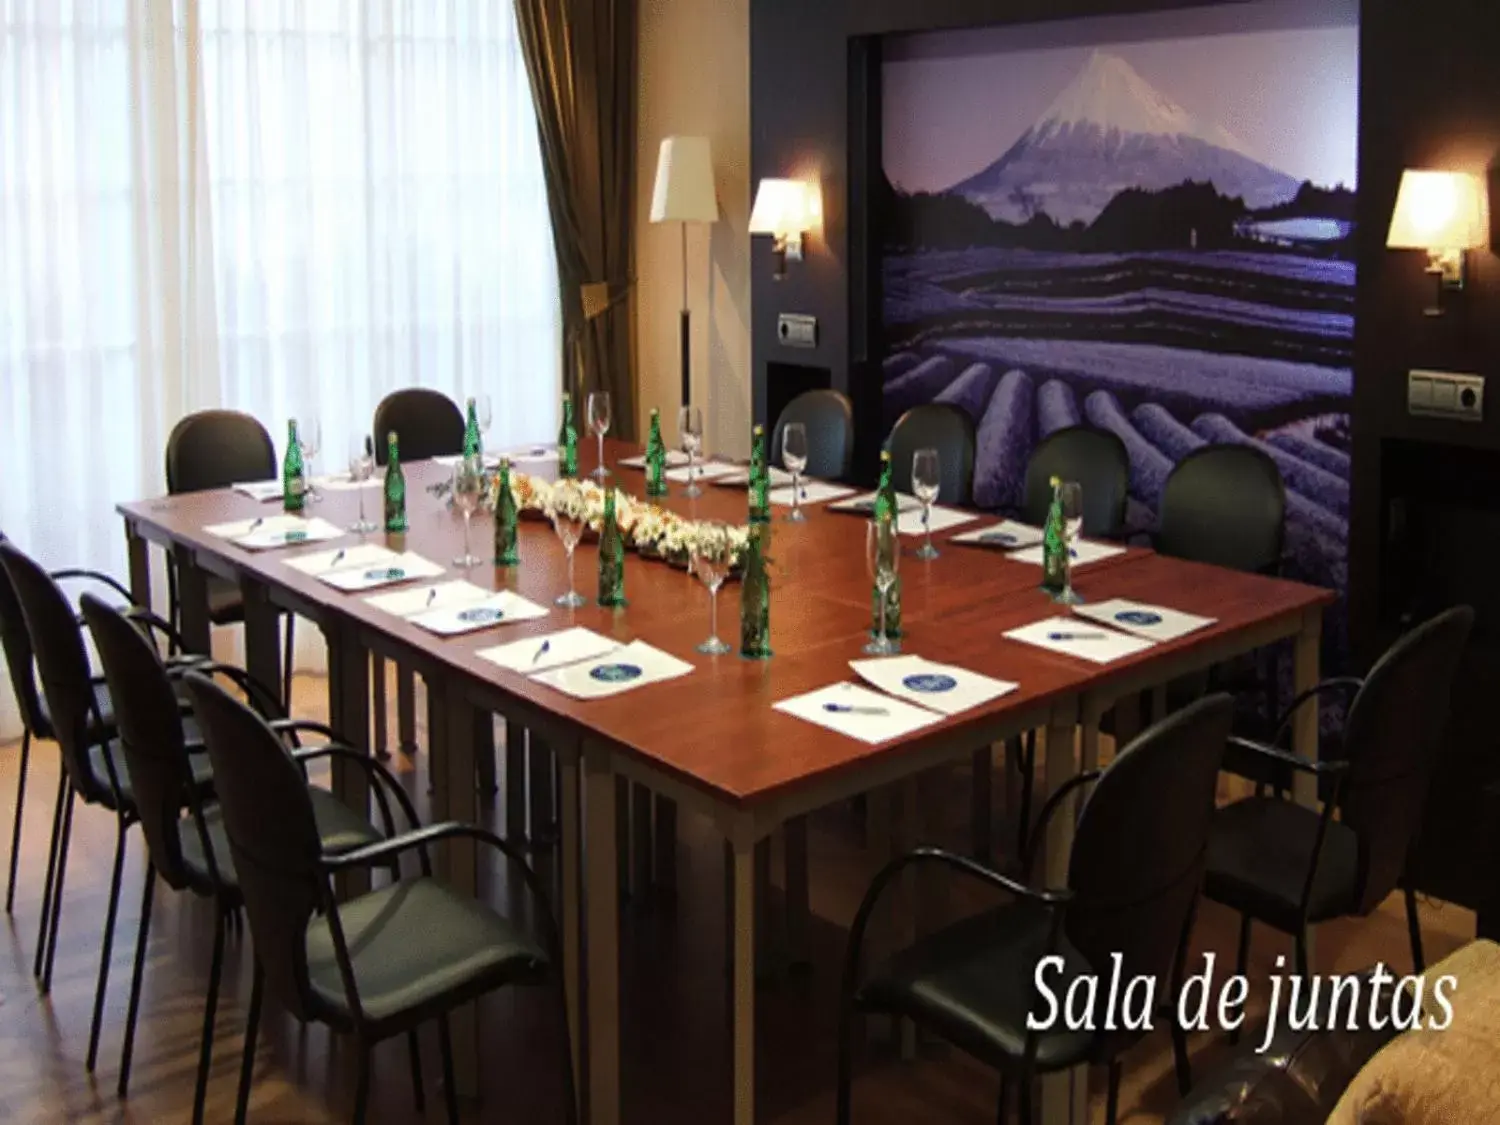 Business facilities in Oh Nice Ulises Ceuta